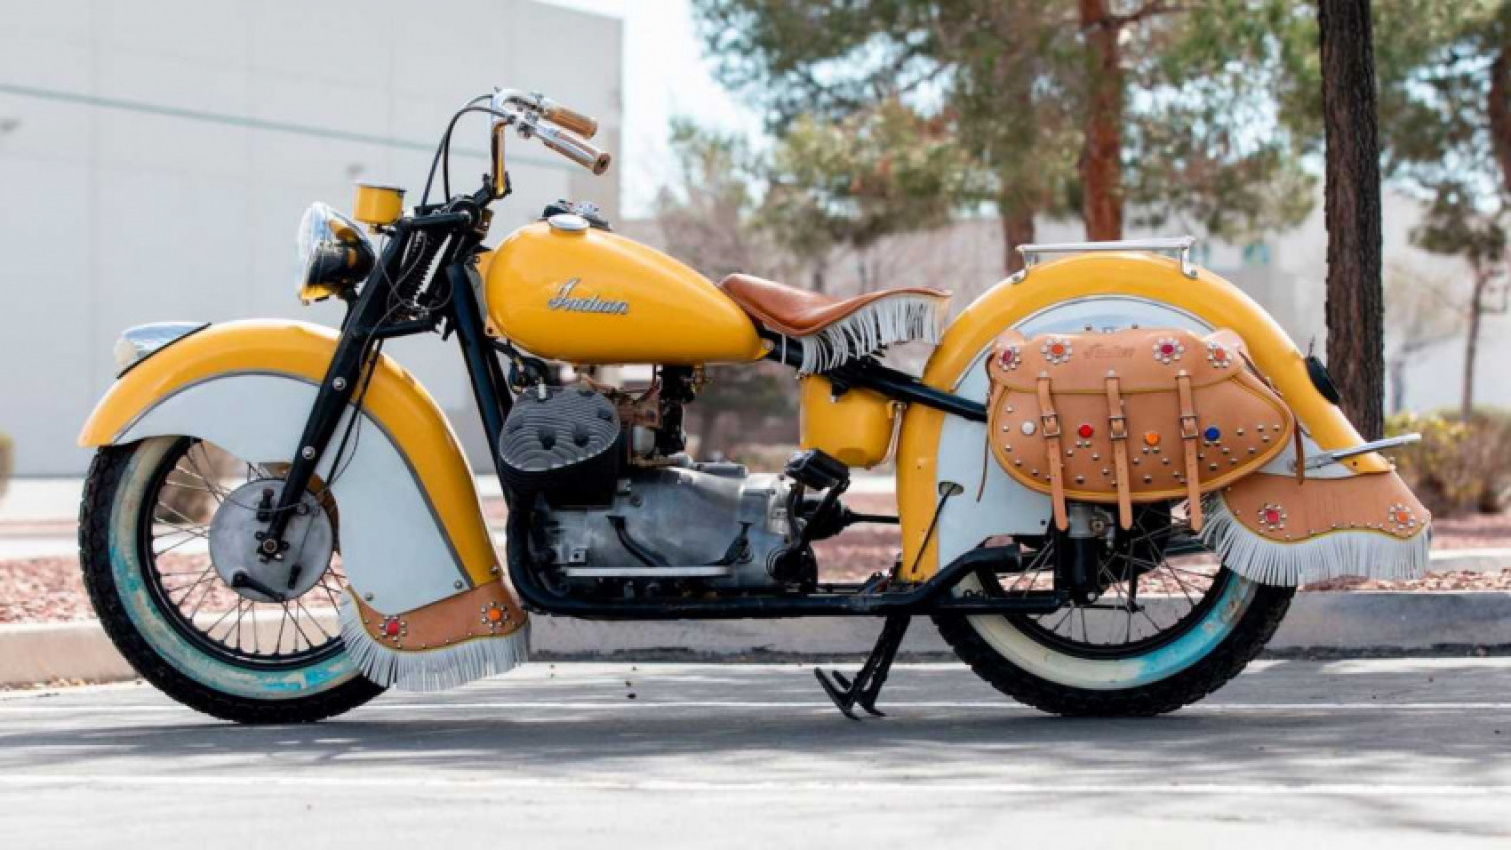 autos, cars, history, the 1941 indian 841 was a u.s. army commission for desert missions